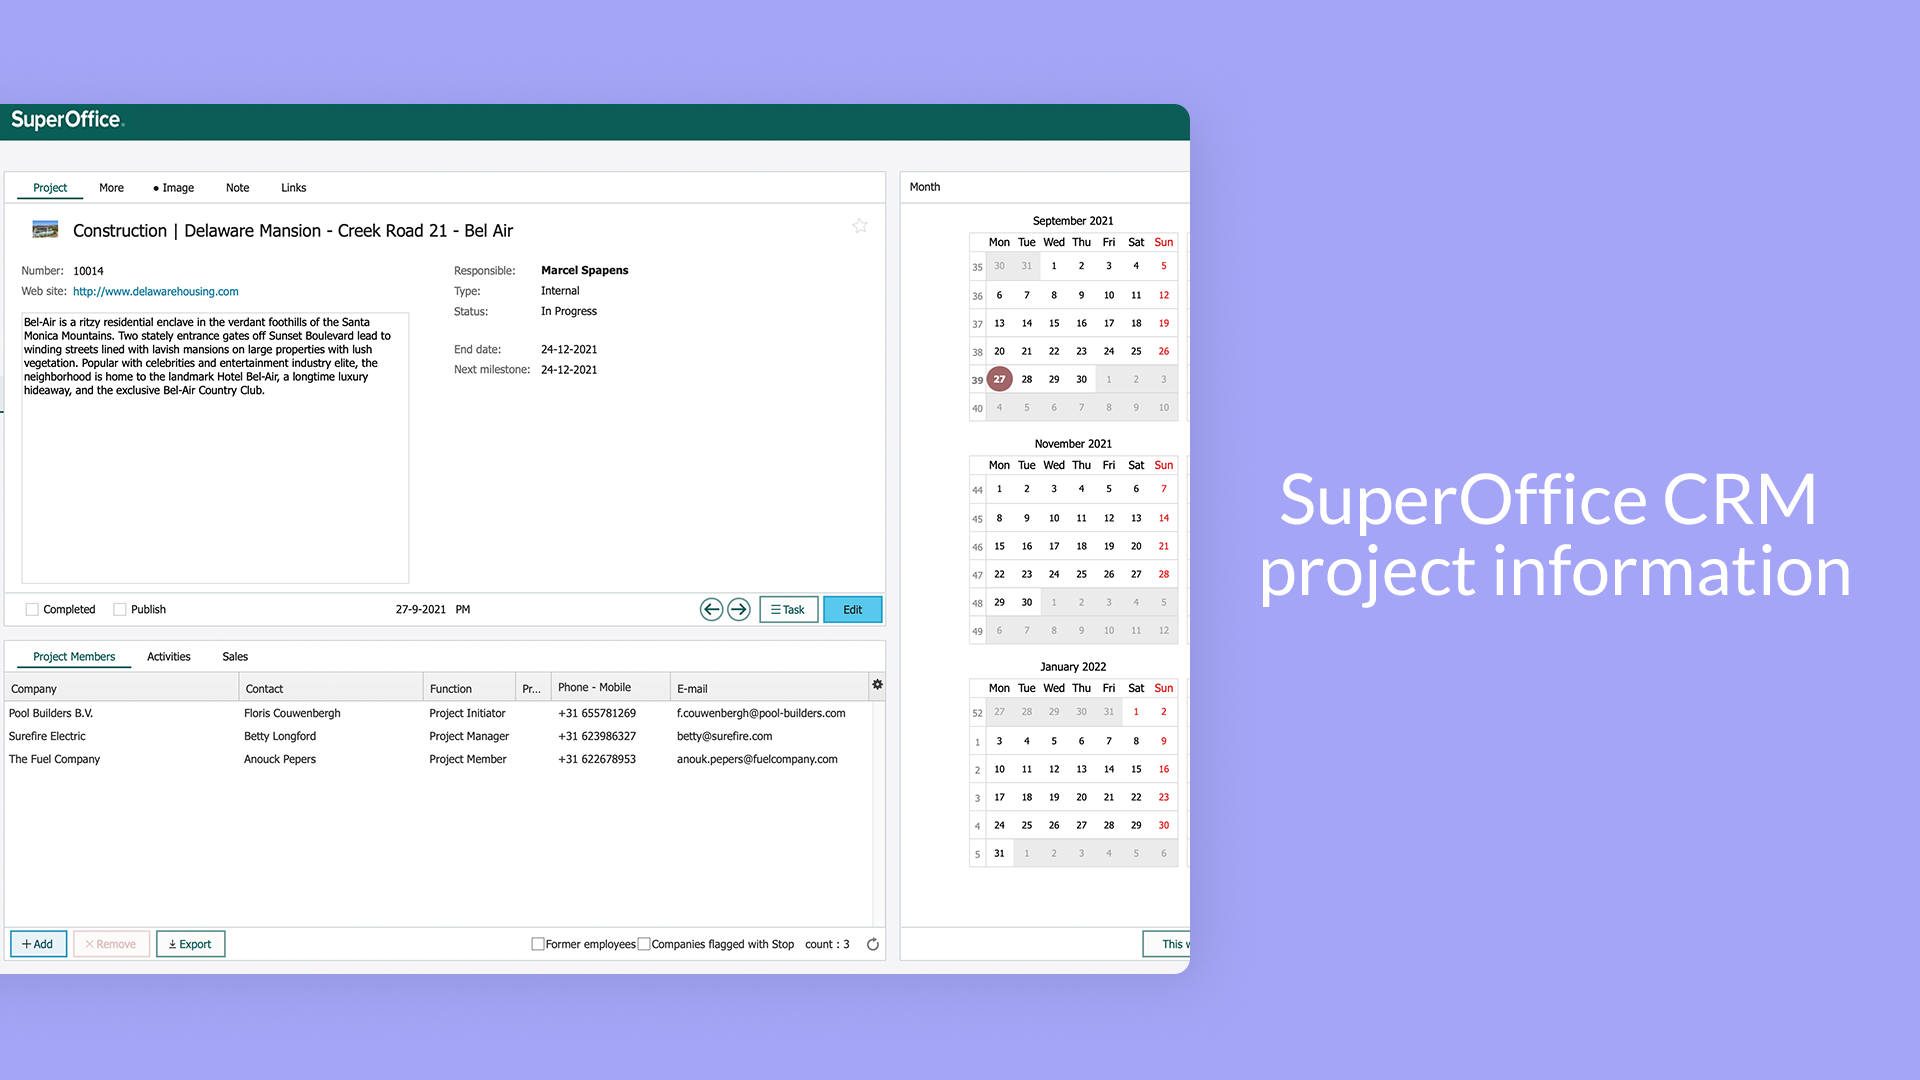 SuperOffice CRM project information